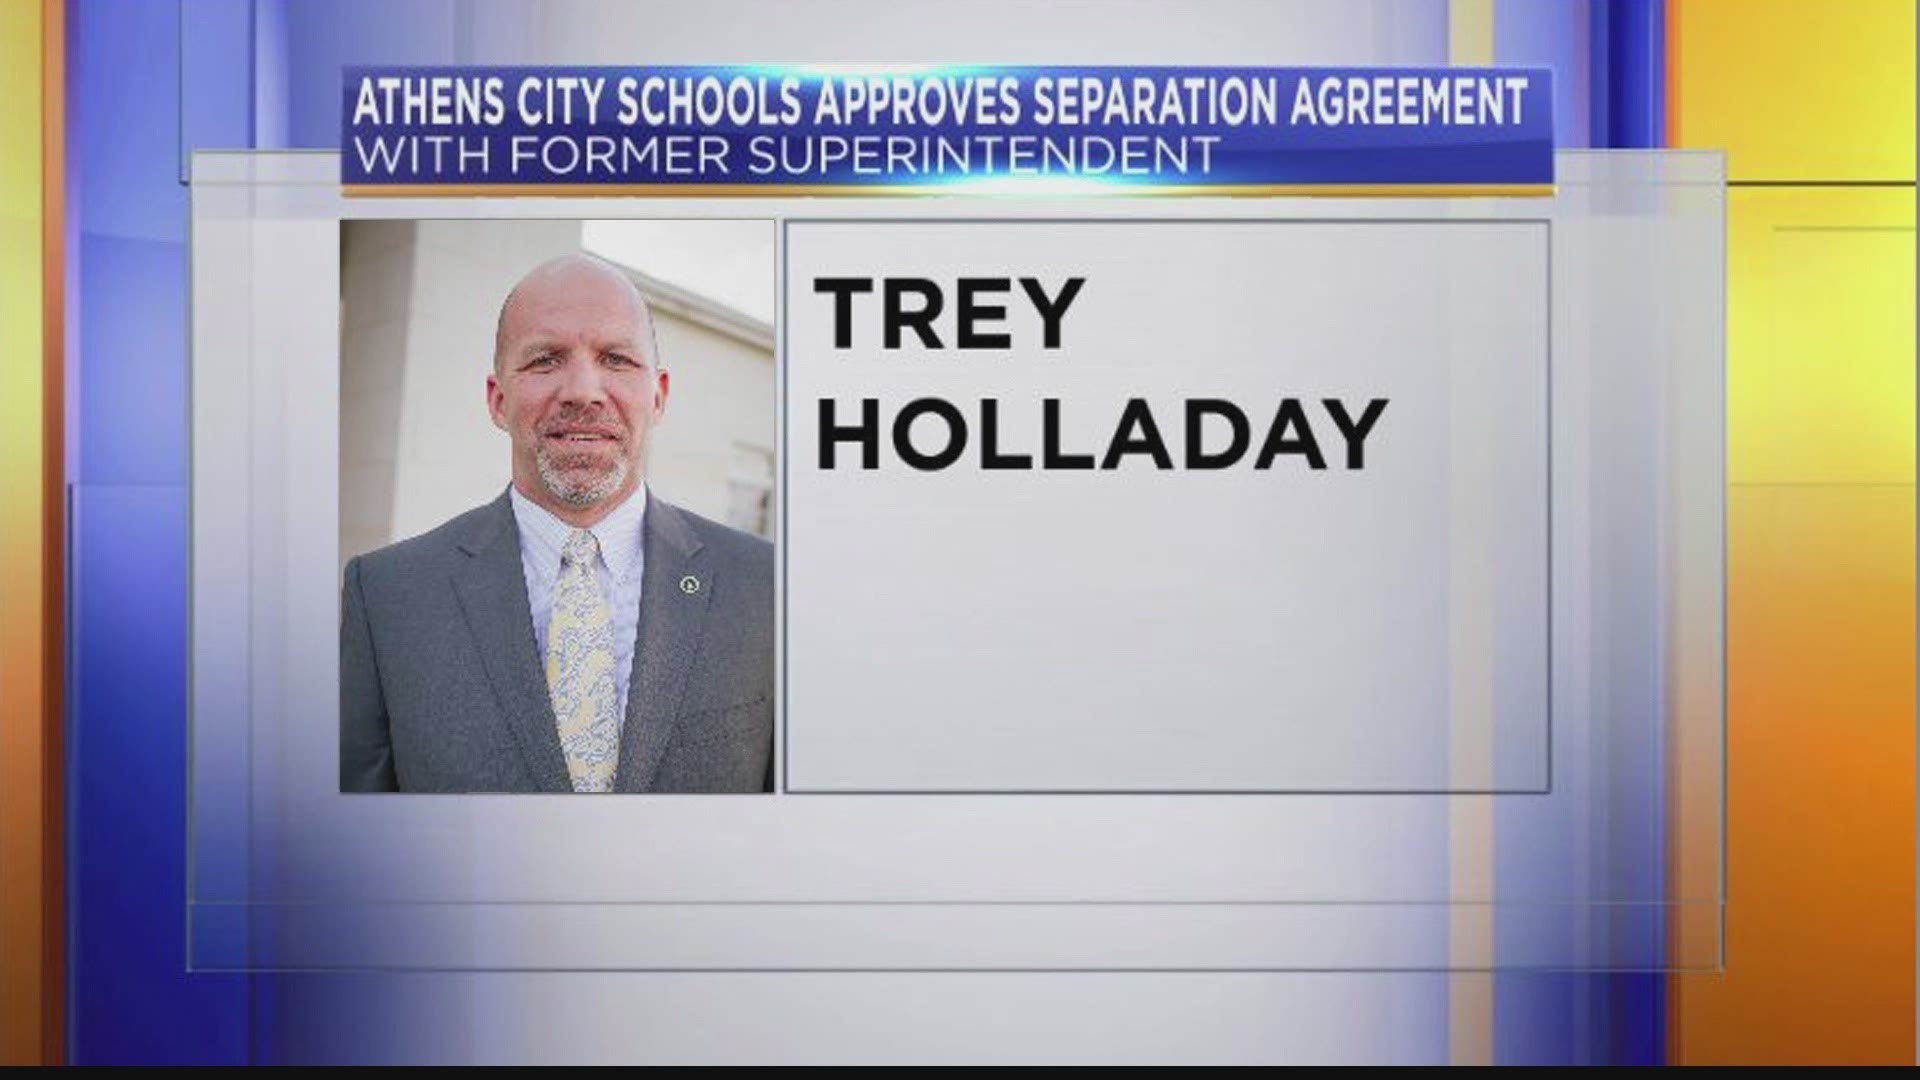 Athens City Schools voted unanimously on Oct. 22 to approve a separation agreement with former Superintendent Trey Holladay.